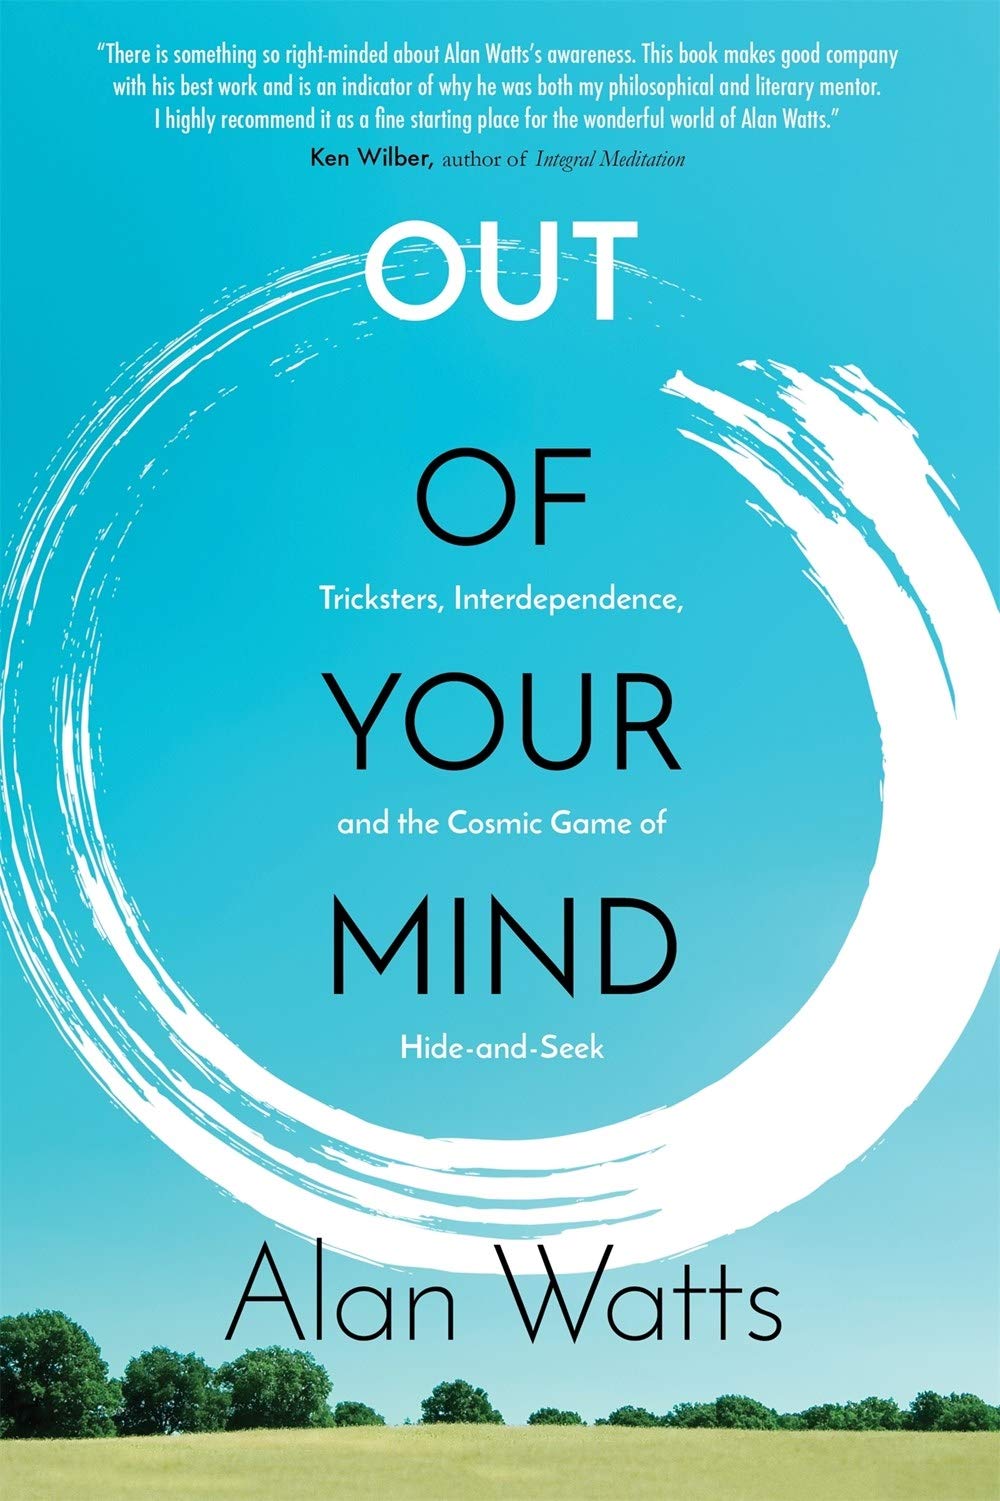 Out of Your Mind: Tricksters, Interdependence and the Cosmic Game of Hide-and-Seek